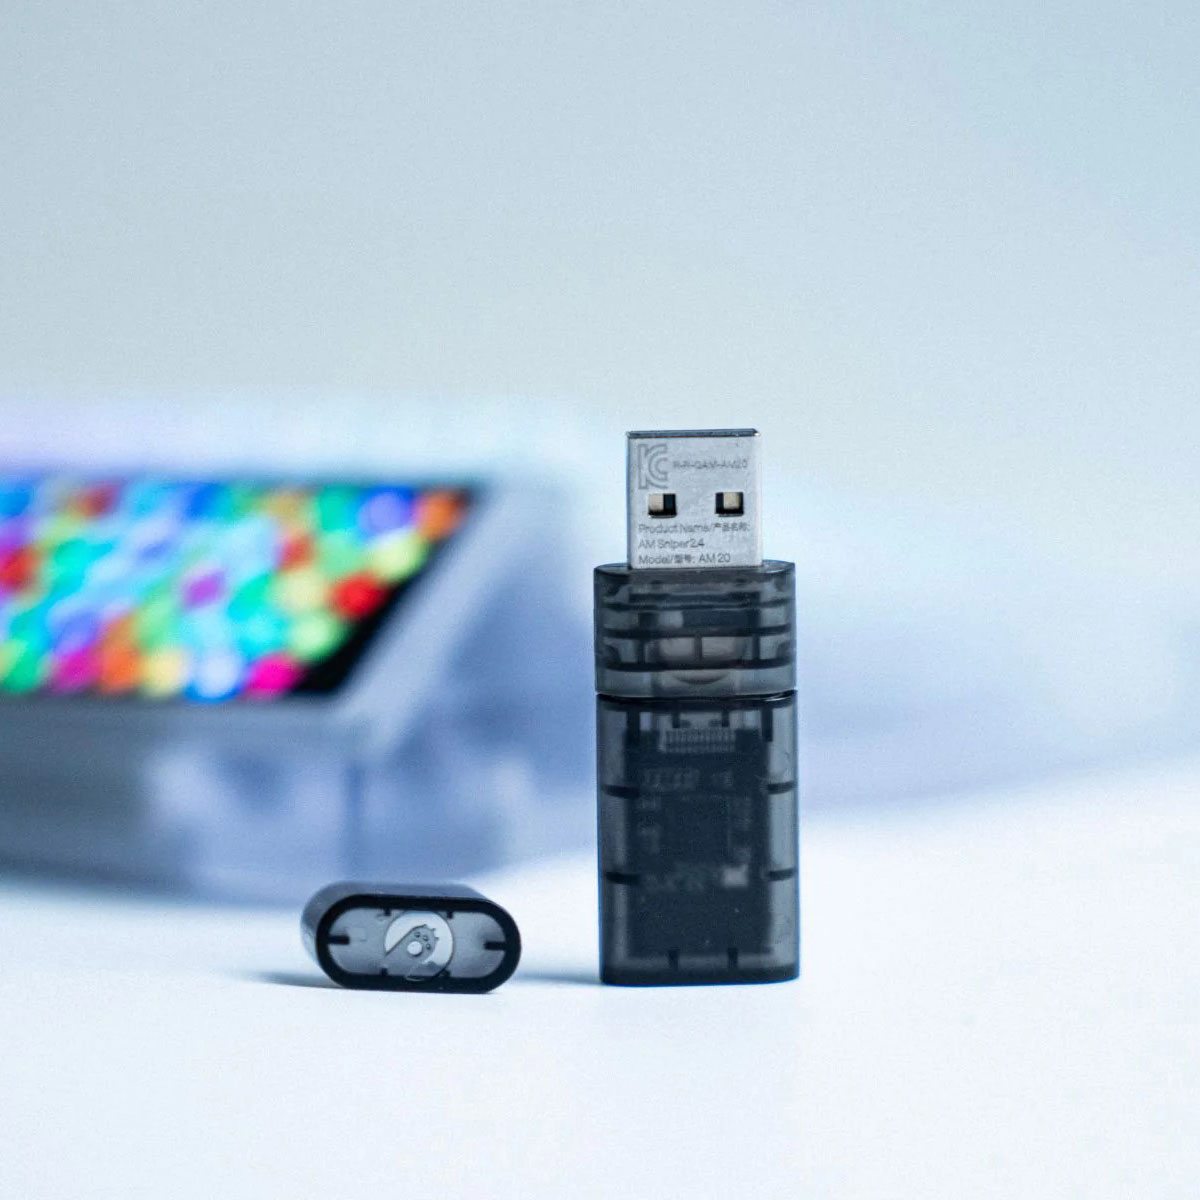 USB ANGRY MIAO SNIPER 2.4 DONGLE (USB RECEIVER)